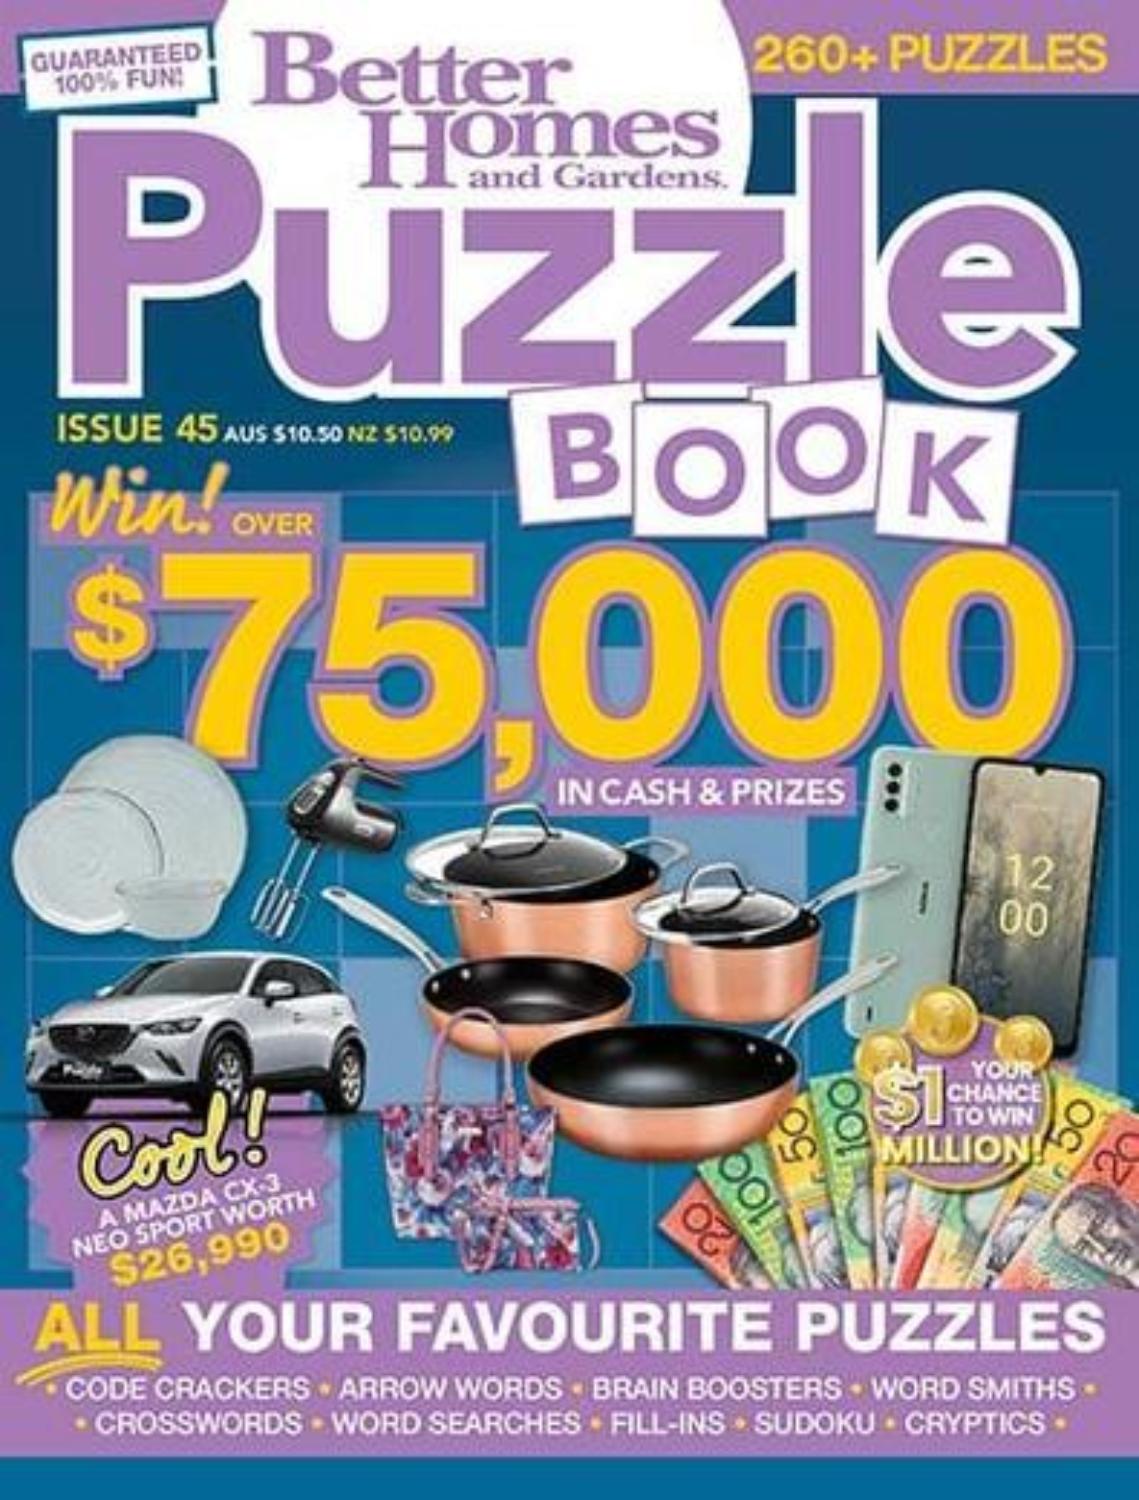 Better Homes And Gardens Puzzle Book Magazine 12 Month Subscription Craft Hobbies